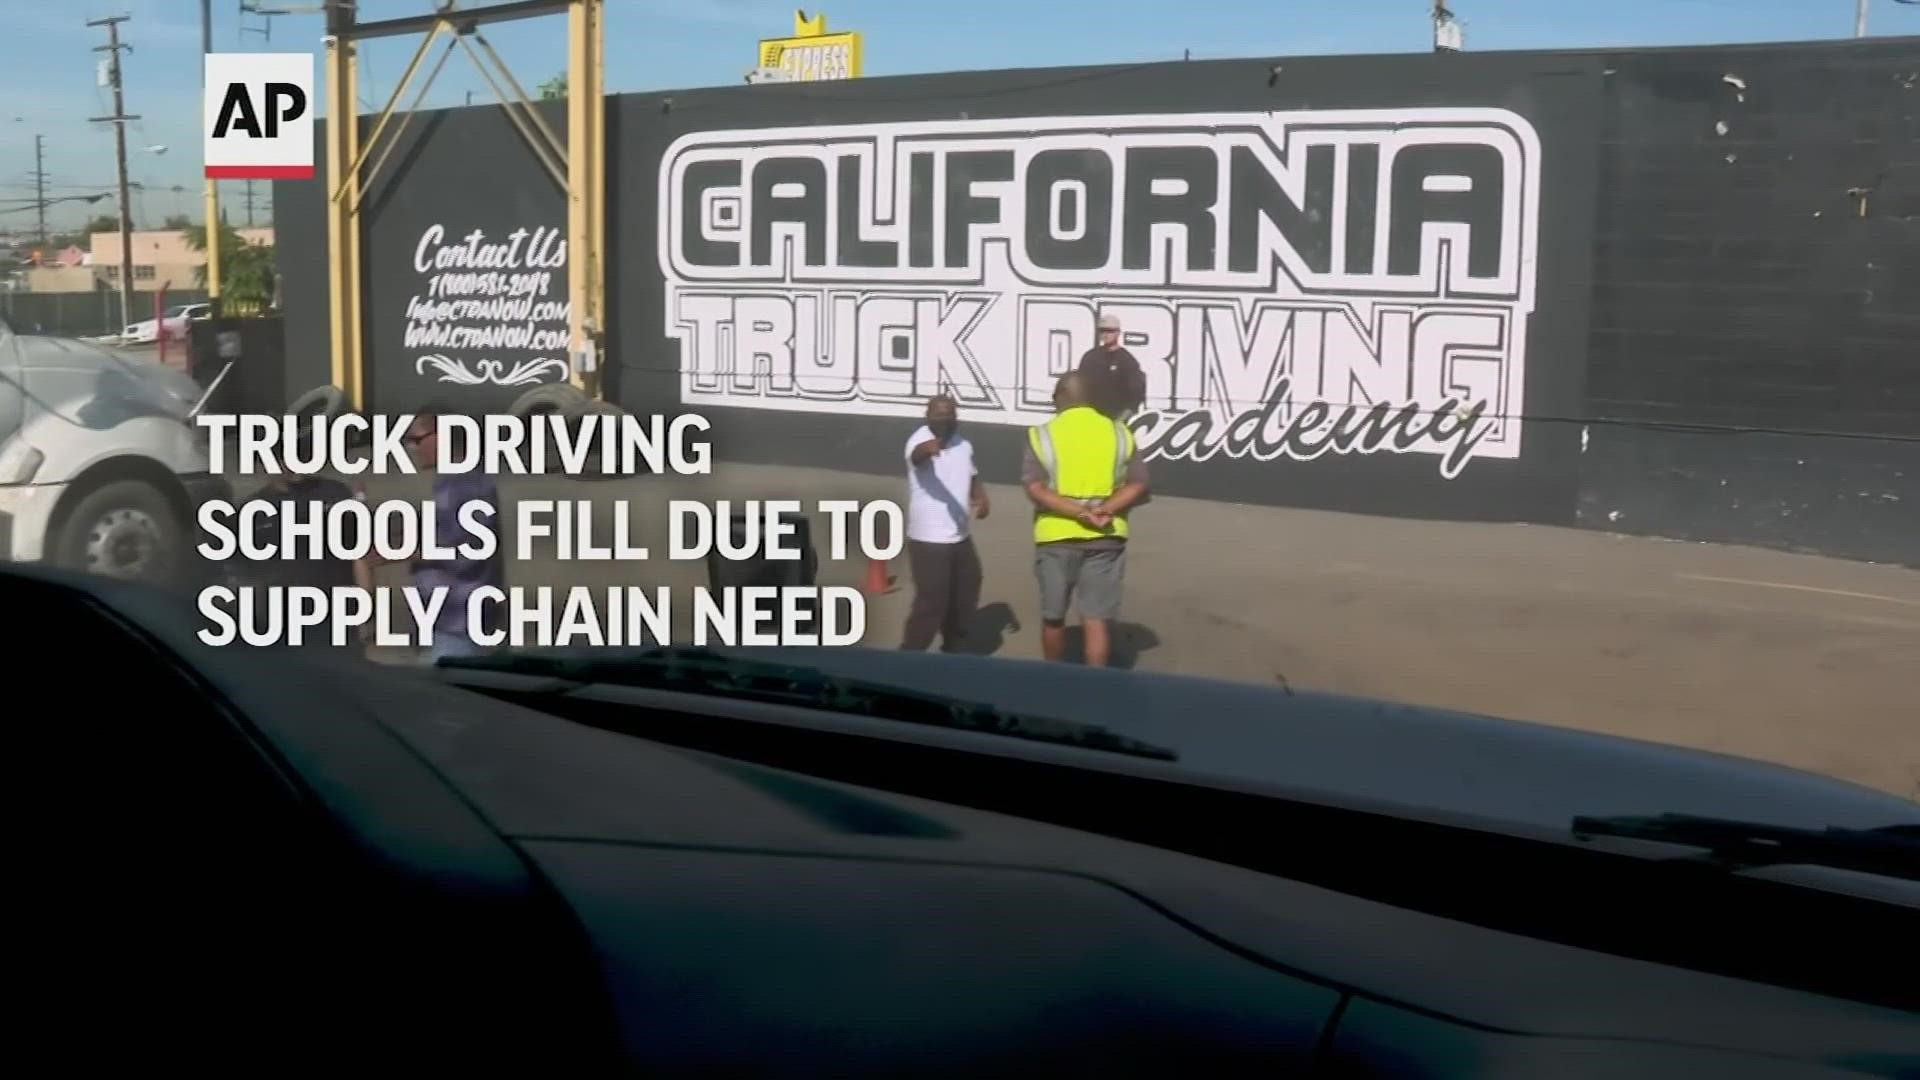 Business is booming at the California Truck Driving Academy amid a nationwide shortage of long-haul drivers, leading to promises of high pay and instant job offers.